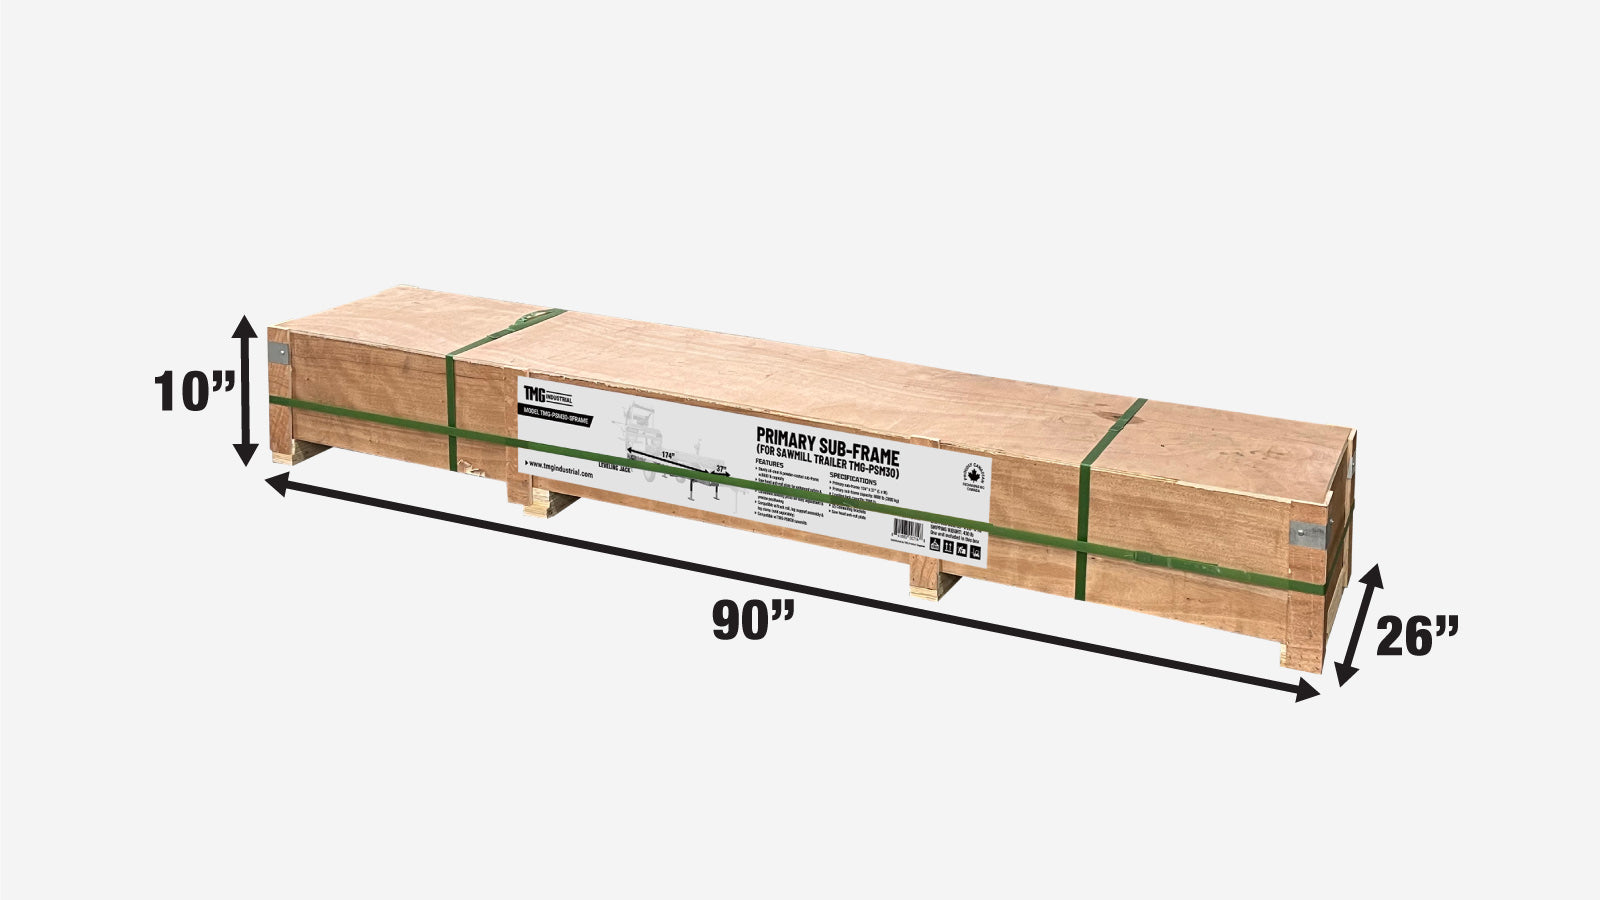 TMG Industrial Primary Sub-Frame for Sawmill Trailer PSM30, 6600-lb Capacity, Leveling Jacks, Anti-Tipping Rail Guard, TMG-PSM30-Sframe-shipping-info-image